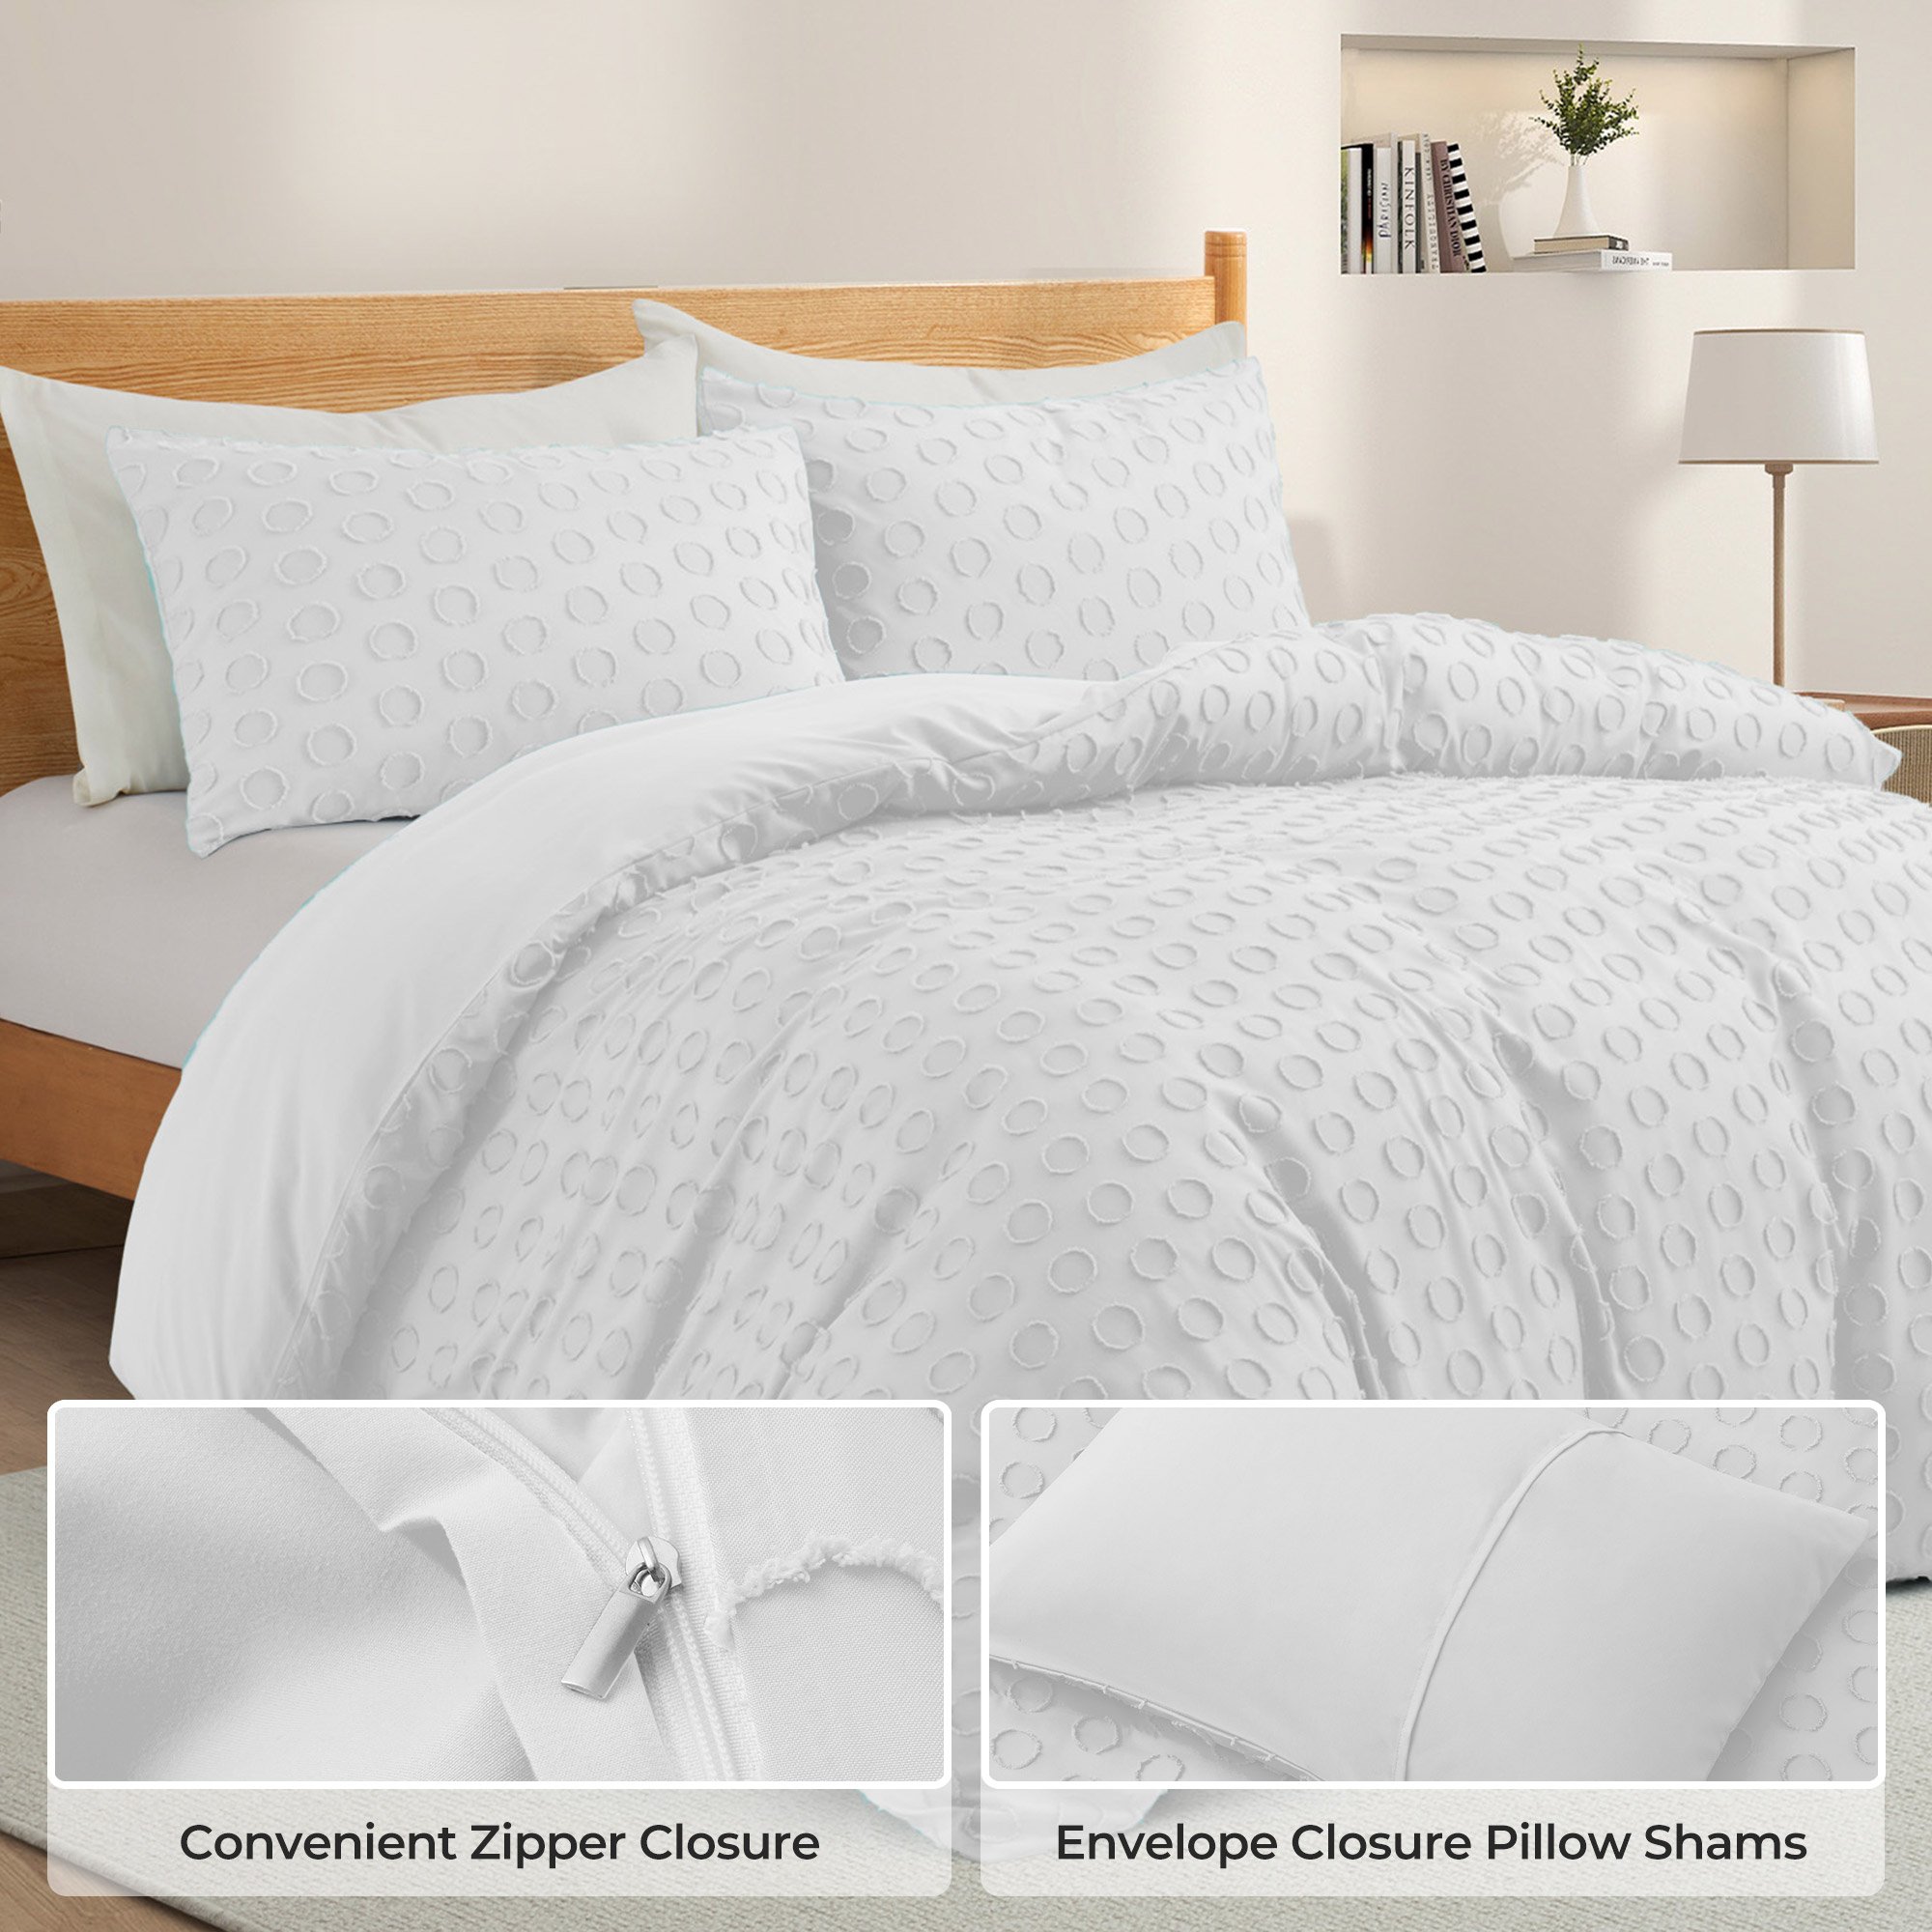 Washed Duvet Cover Set, 2 Or 3 Pieces With Zipper Closure - Full/Queen Size